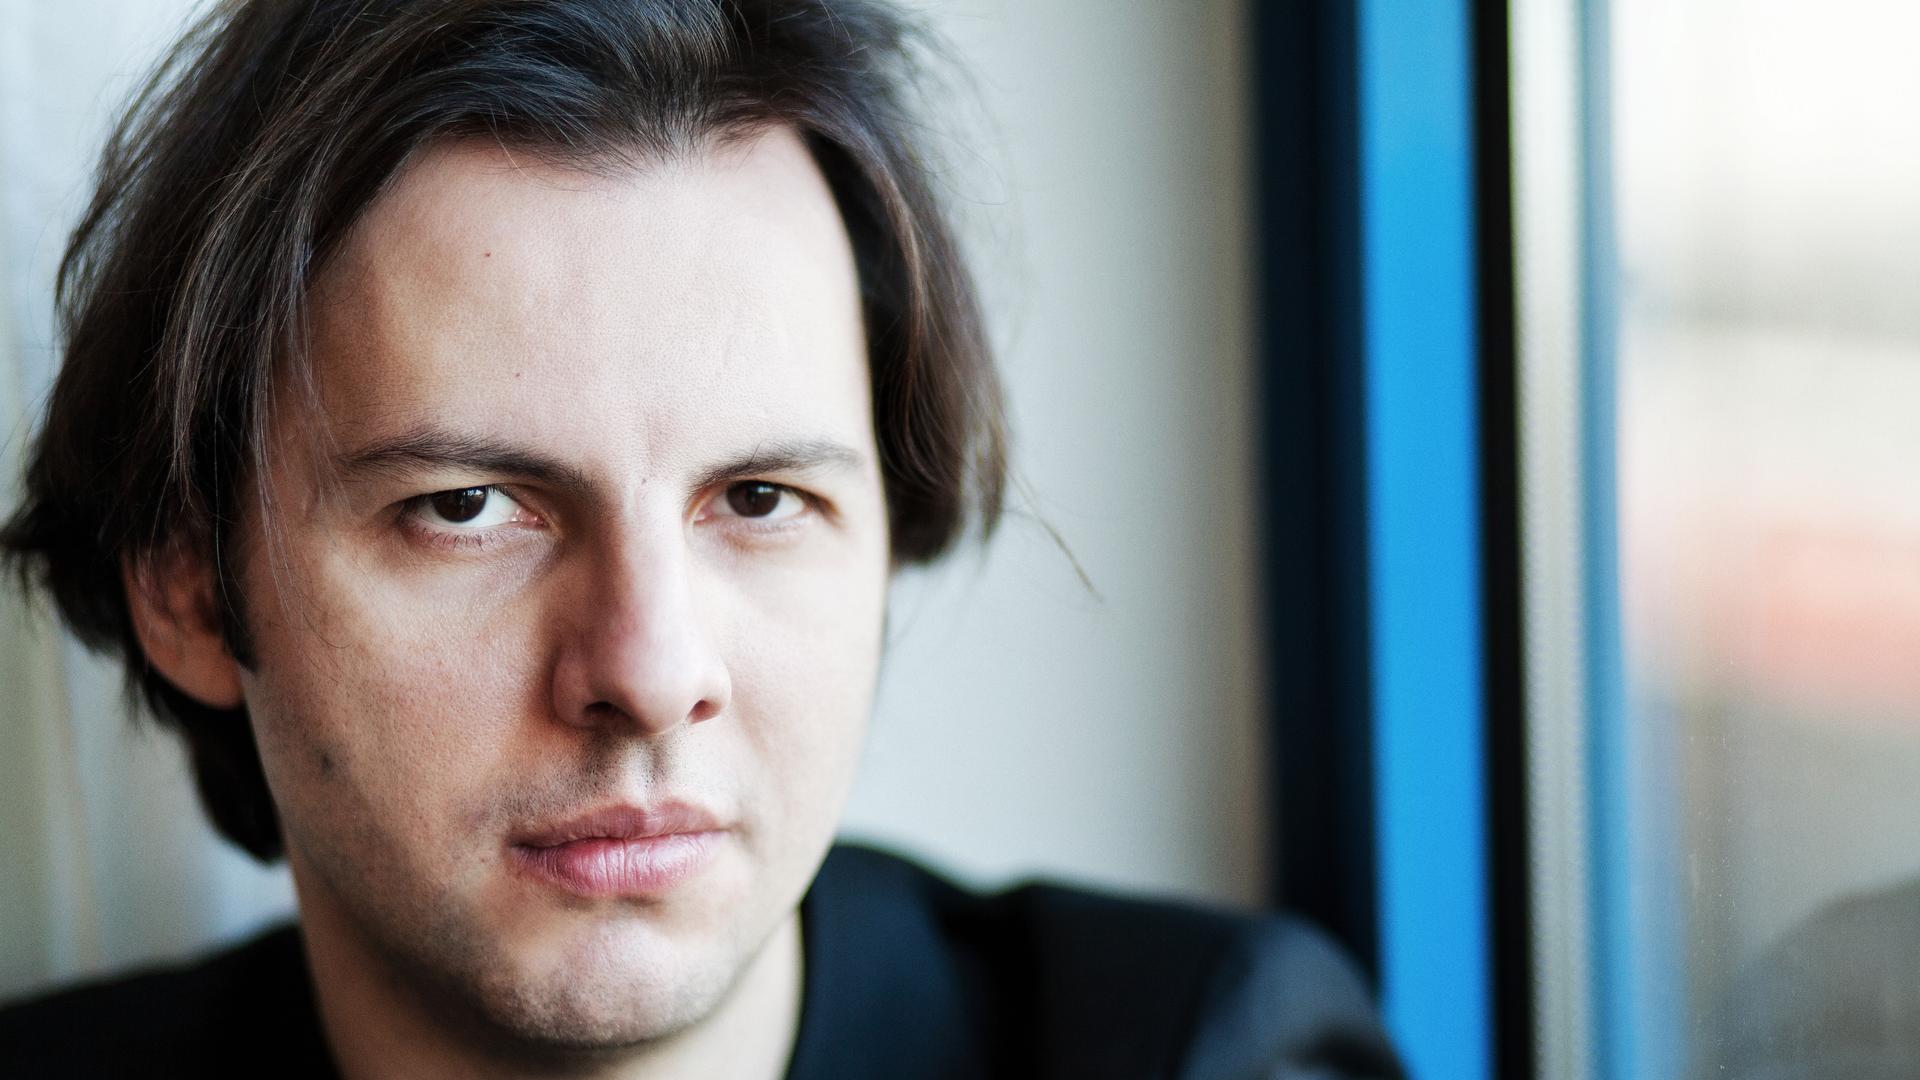 Greek-born conductor Teodor Currentzis is recording Mozart's Da Ponte operas in Russia's Ural Mountains. He's known for recording sessions that stretch that go on for 14 hours or more.